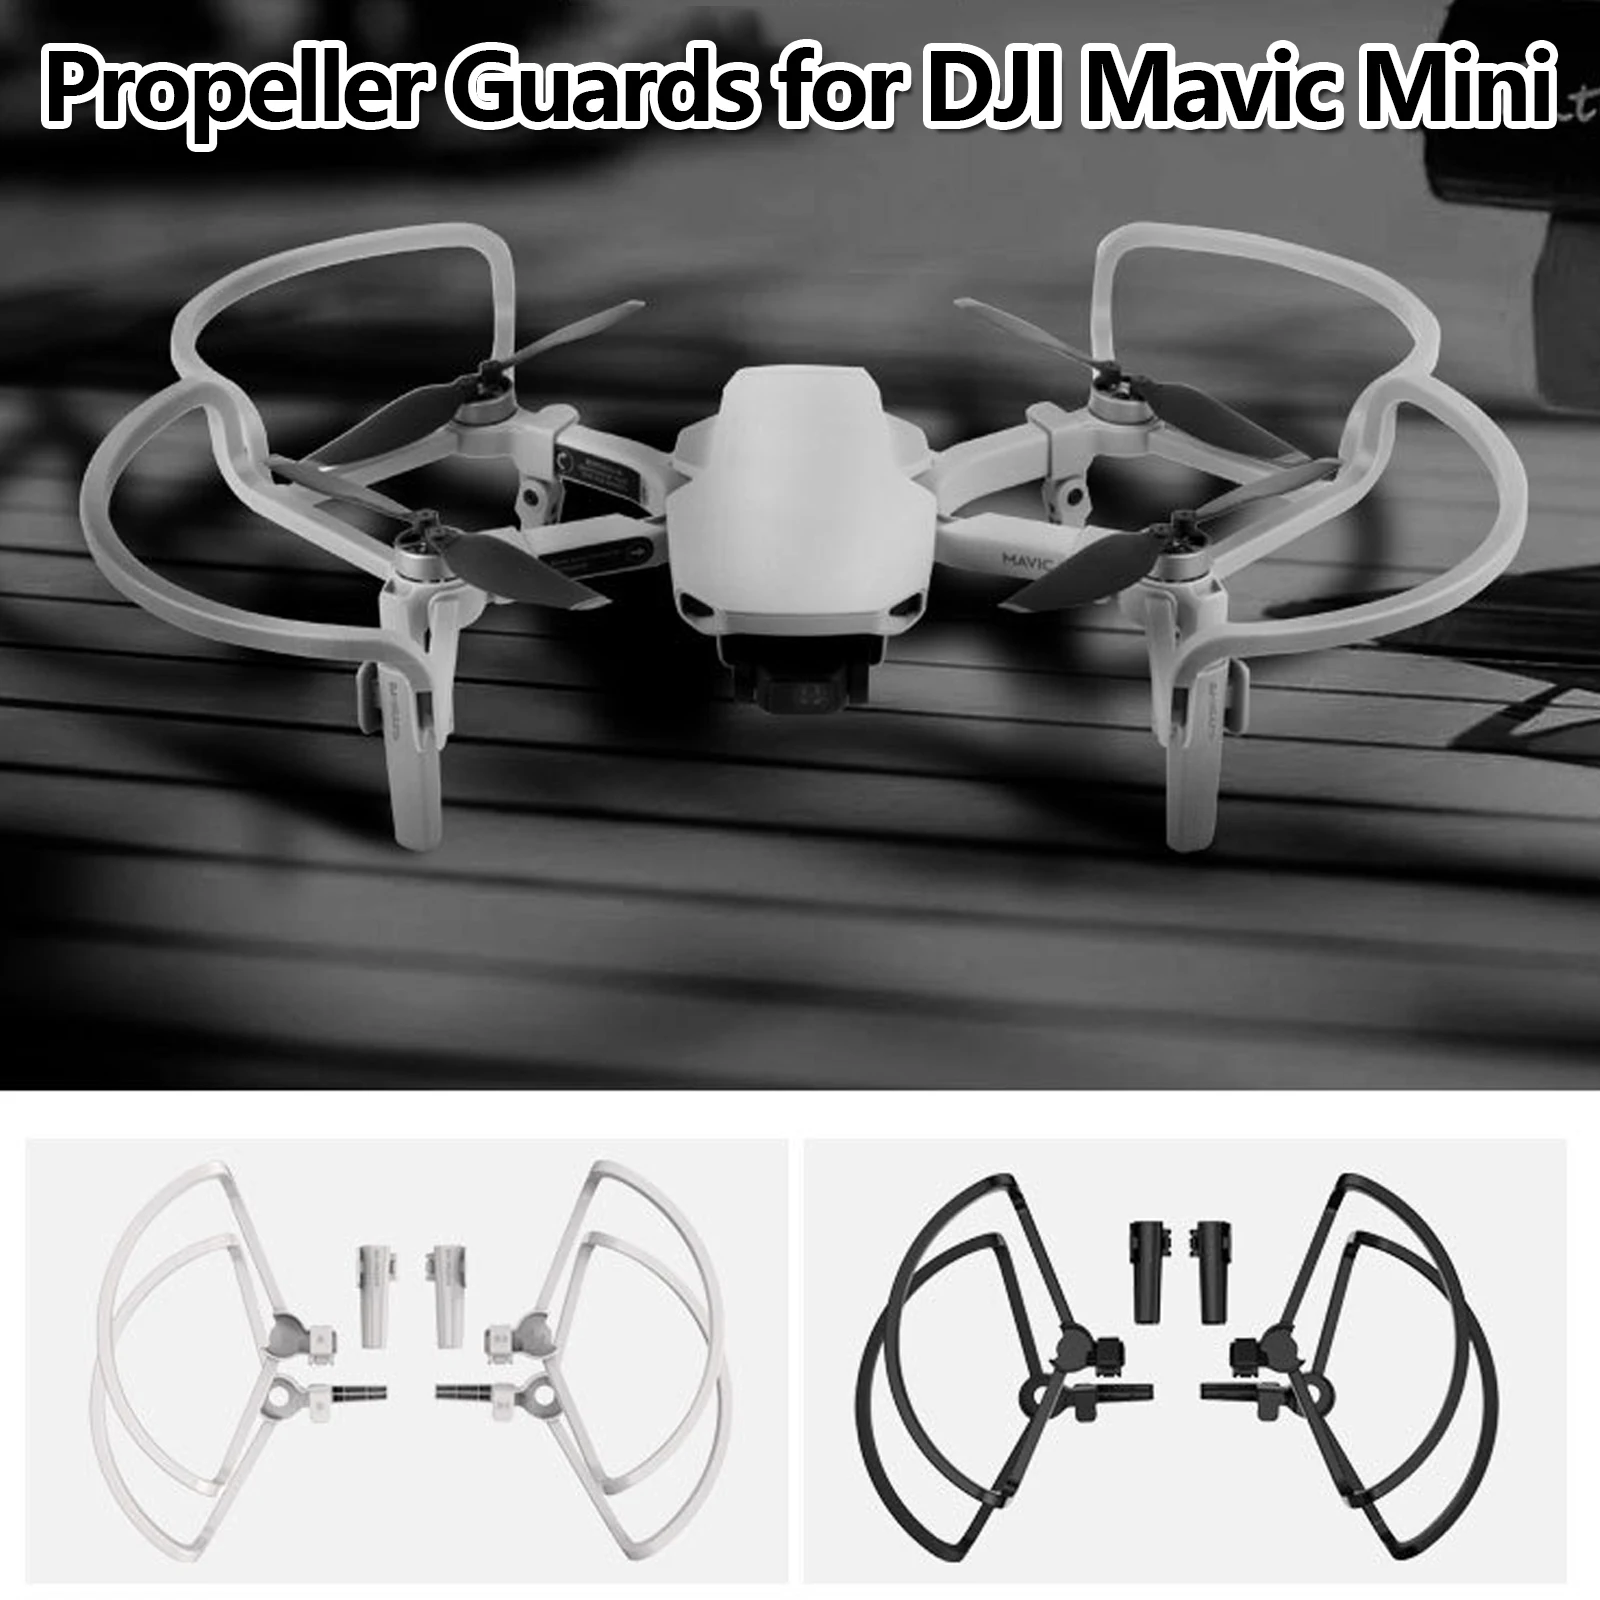 

SUNNYLIFE 4PCS Propeller Shield Guards Rings Protector with Folding Landing Gears for DJI Mavic Mini 1 2 Drones Accessories